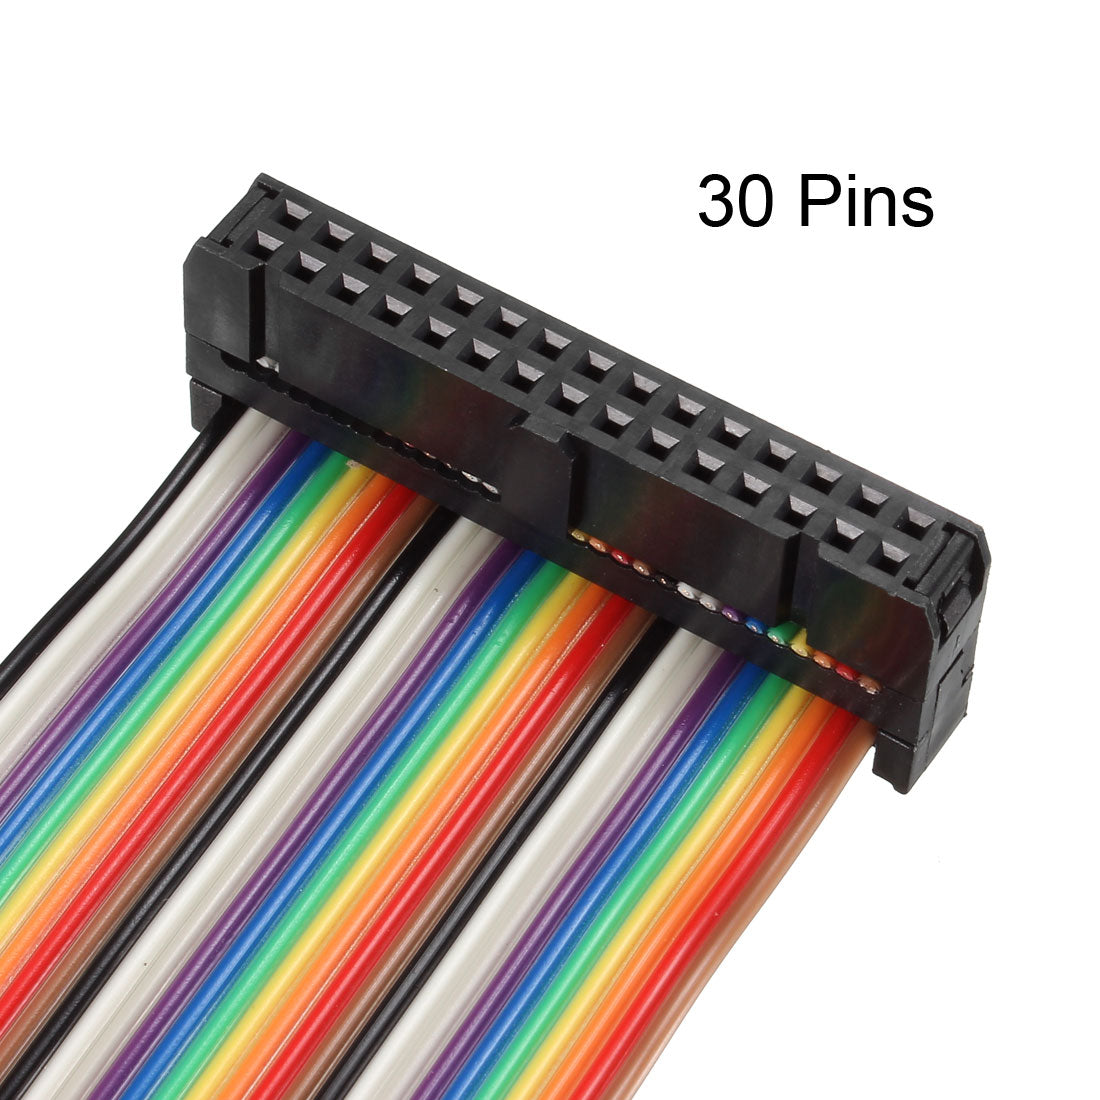 uxcell Uxcell IDC Rainbow Wire Flat Ribbon Cable 30P A-type FC/FC Connector 2.54mm Pitch 1m/39.3inch Length